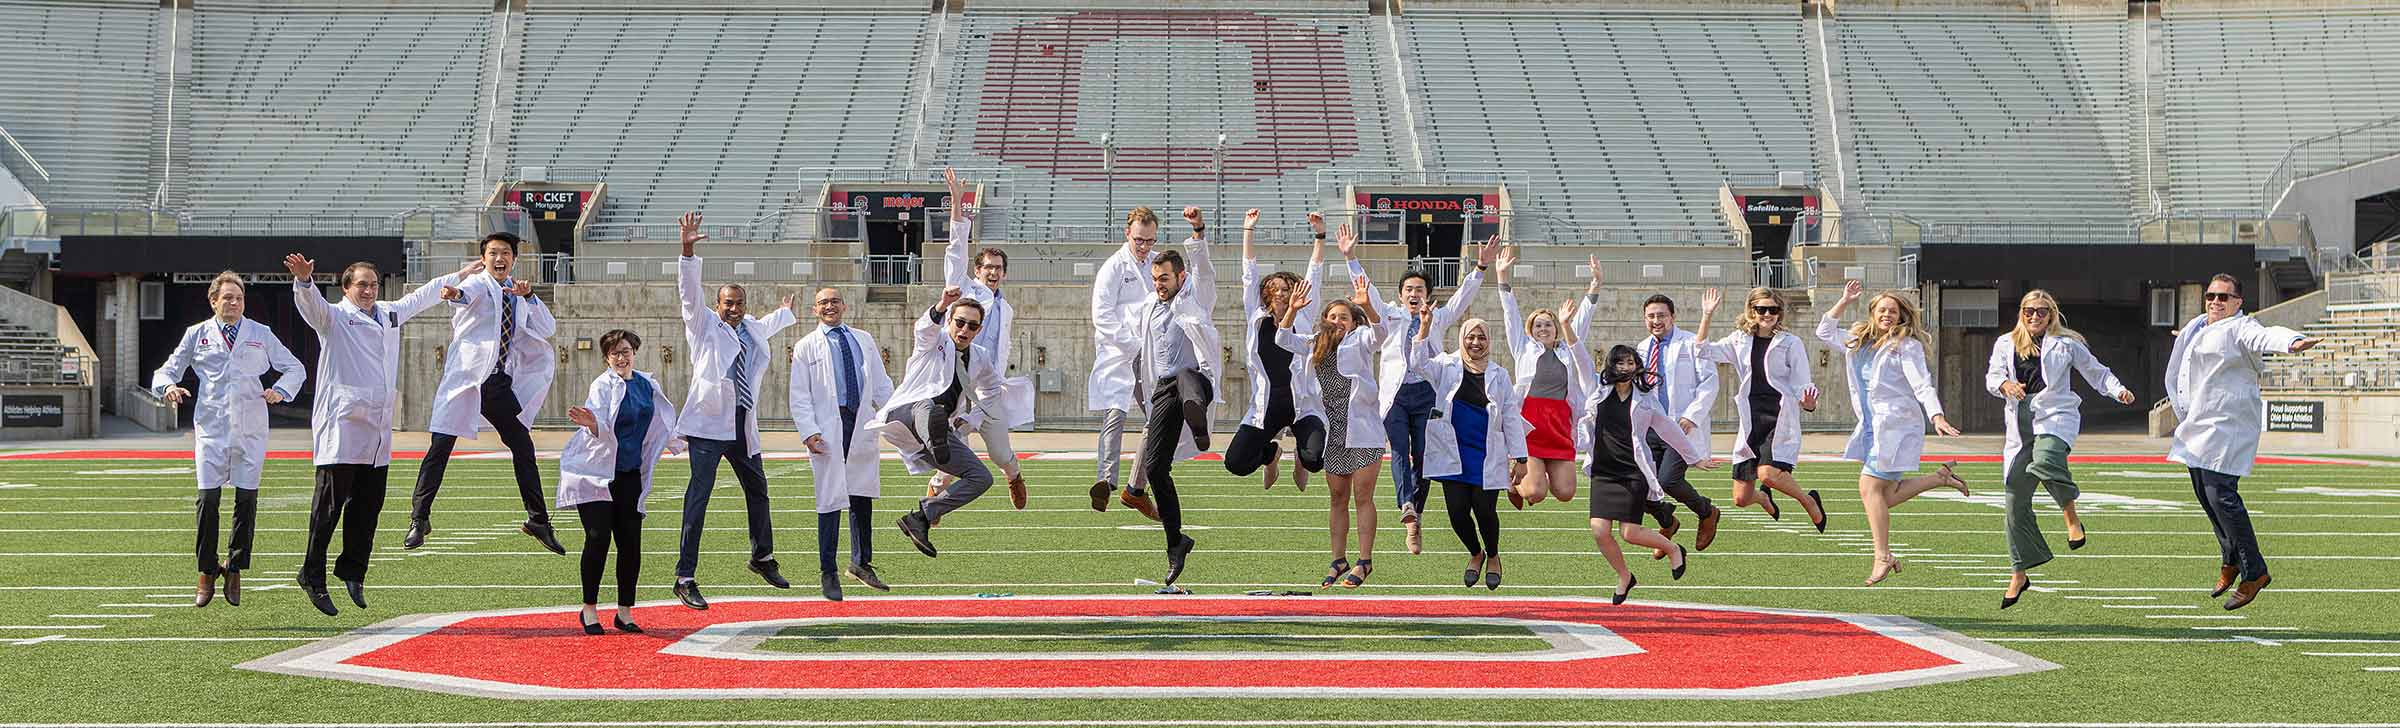 Anesthesiology residents in a jump at the Ohio State stadium